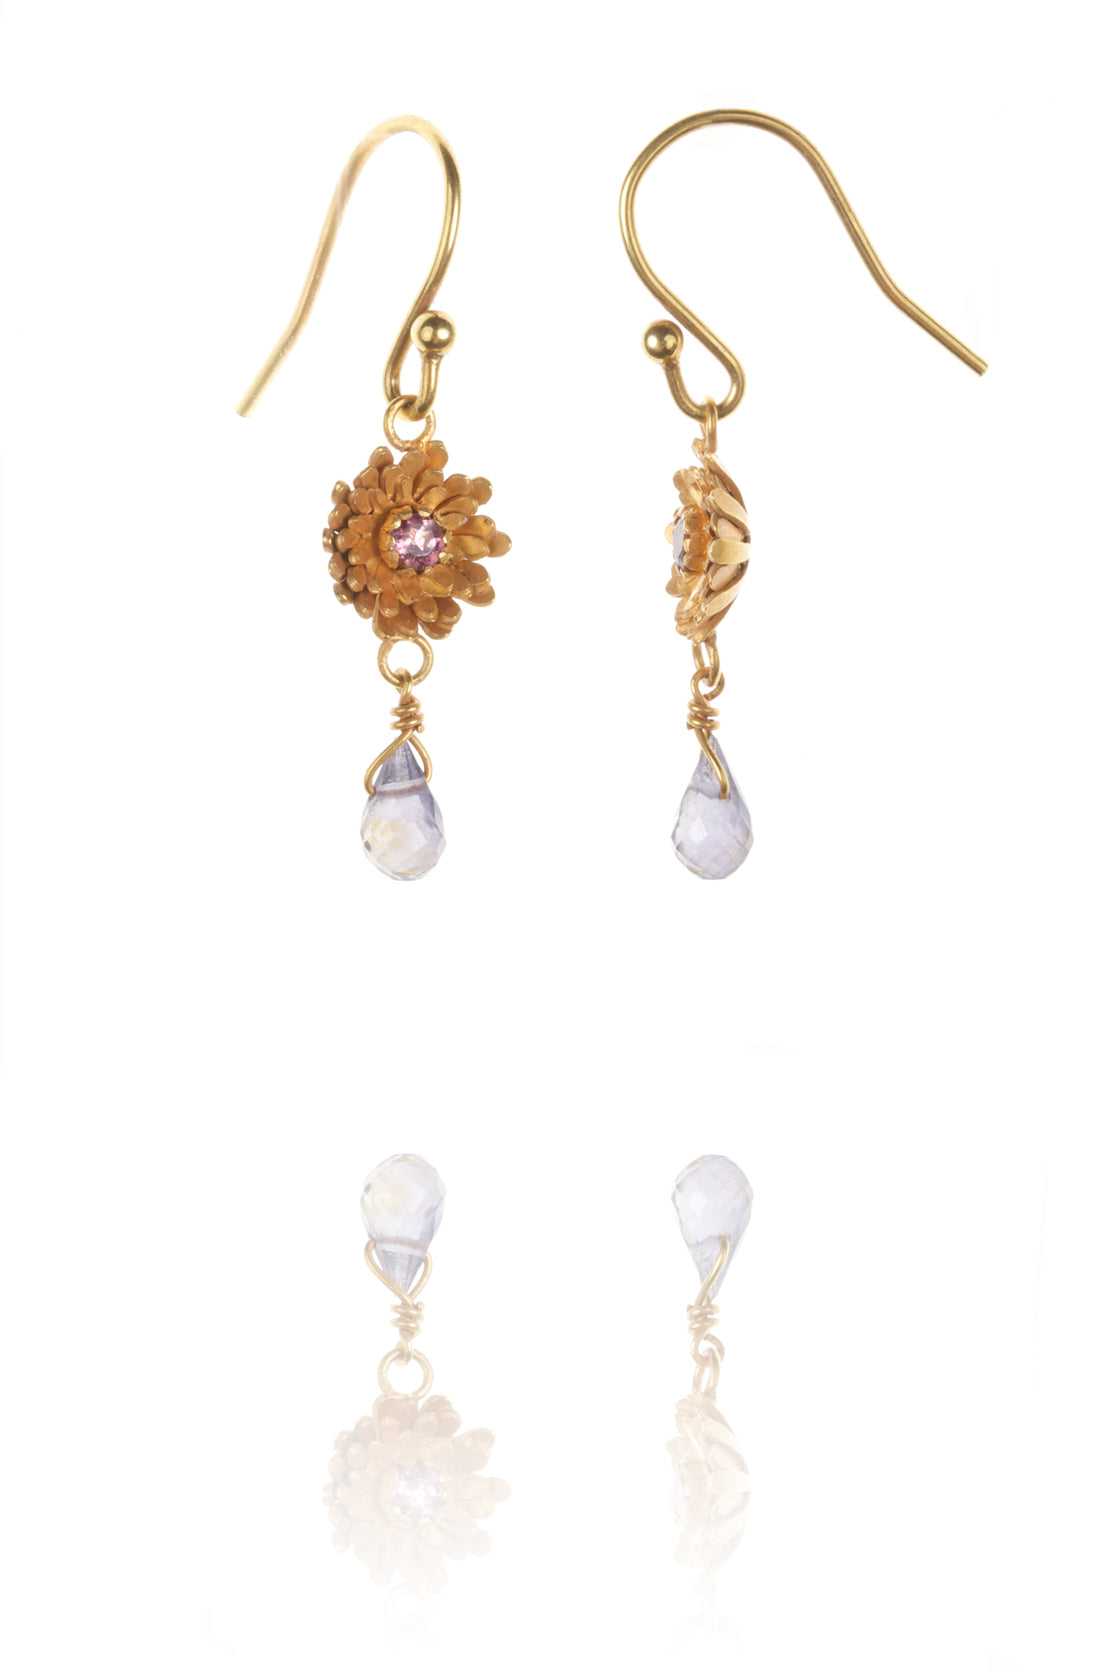 Gold dahlia drop earrings with yellow flower and white stone